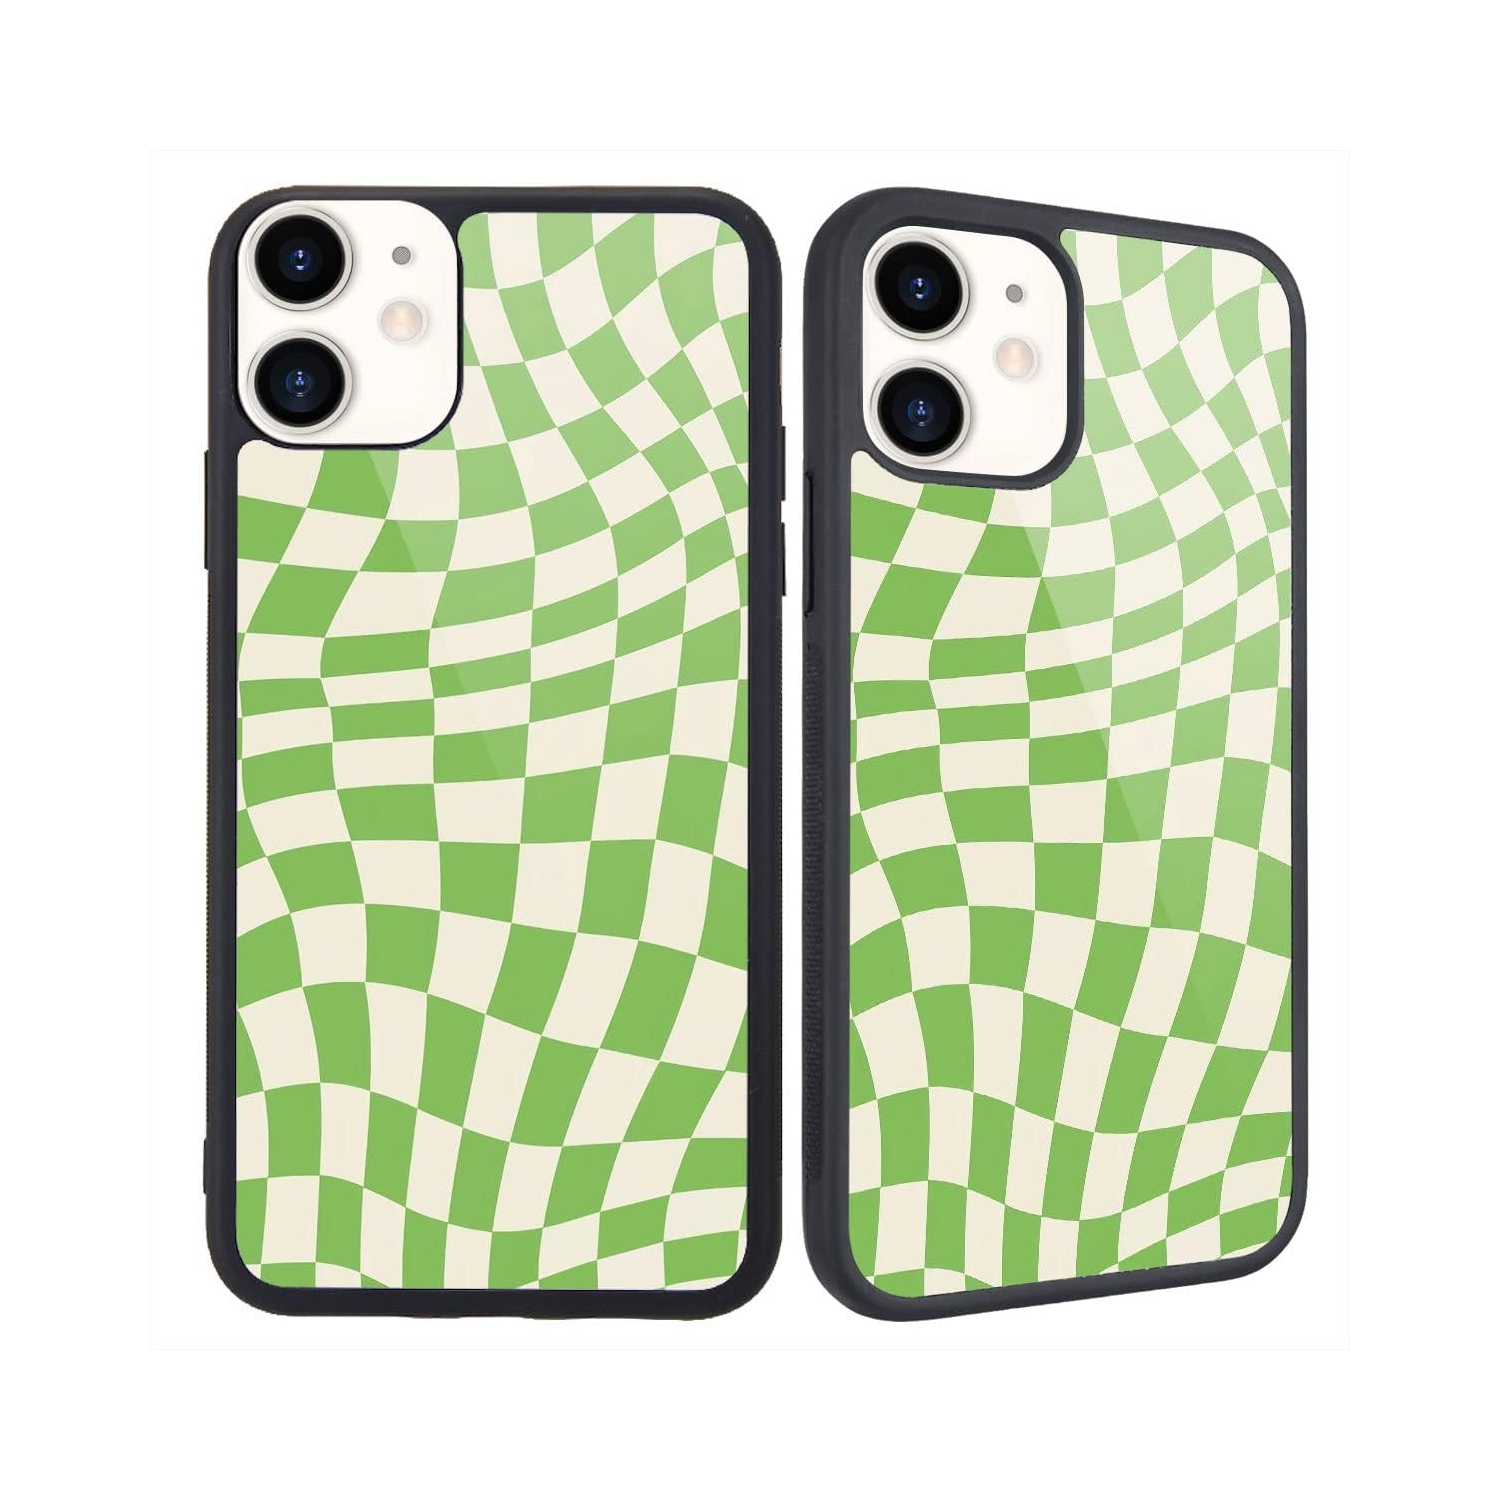 Compatible with iPhone 11 Case Twist Green Checkerboard, Hard Back Cover with Grid Plaid Tartan Design Soft TPU